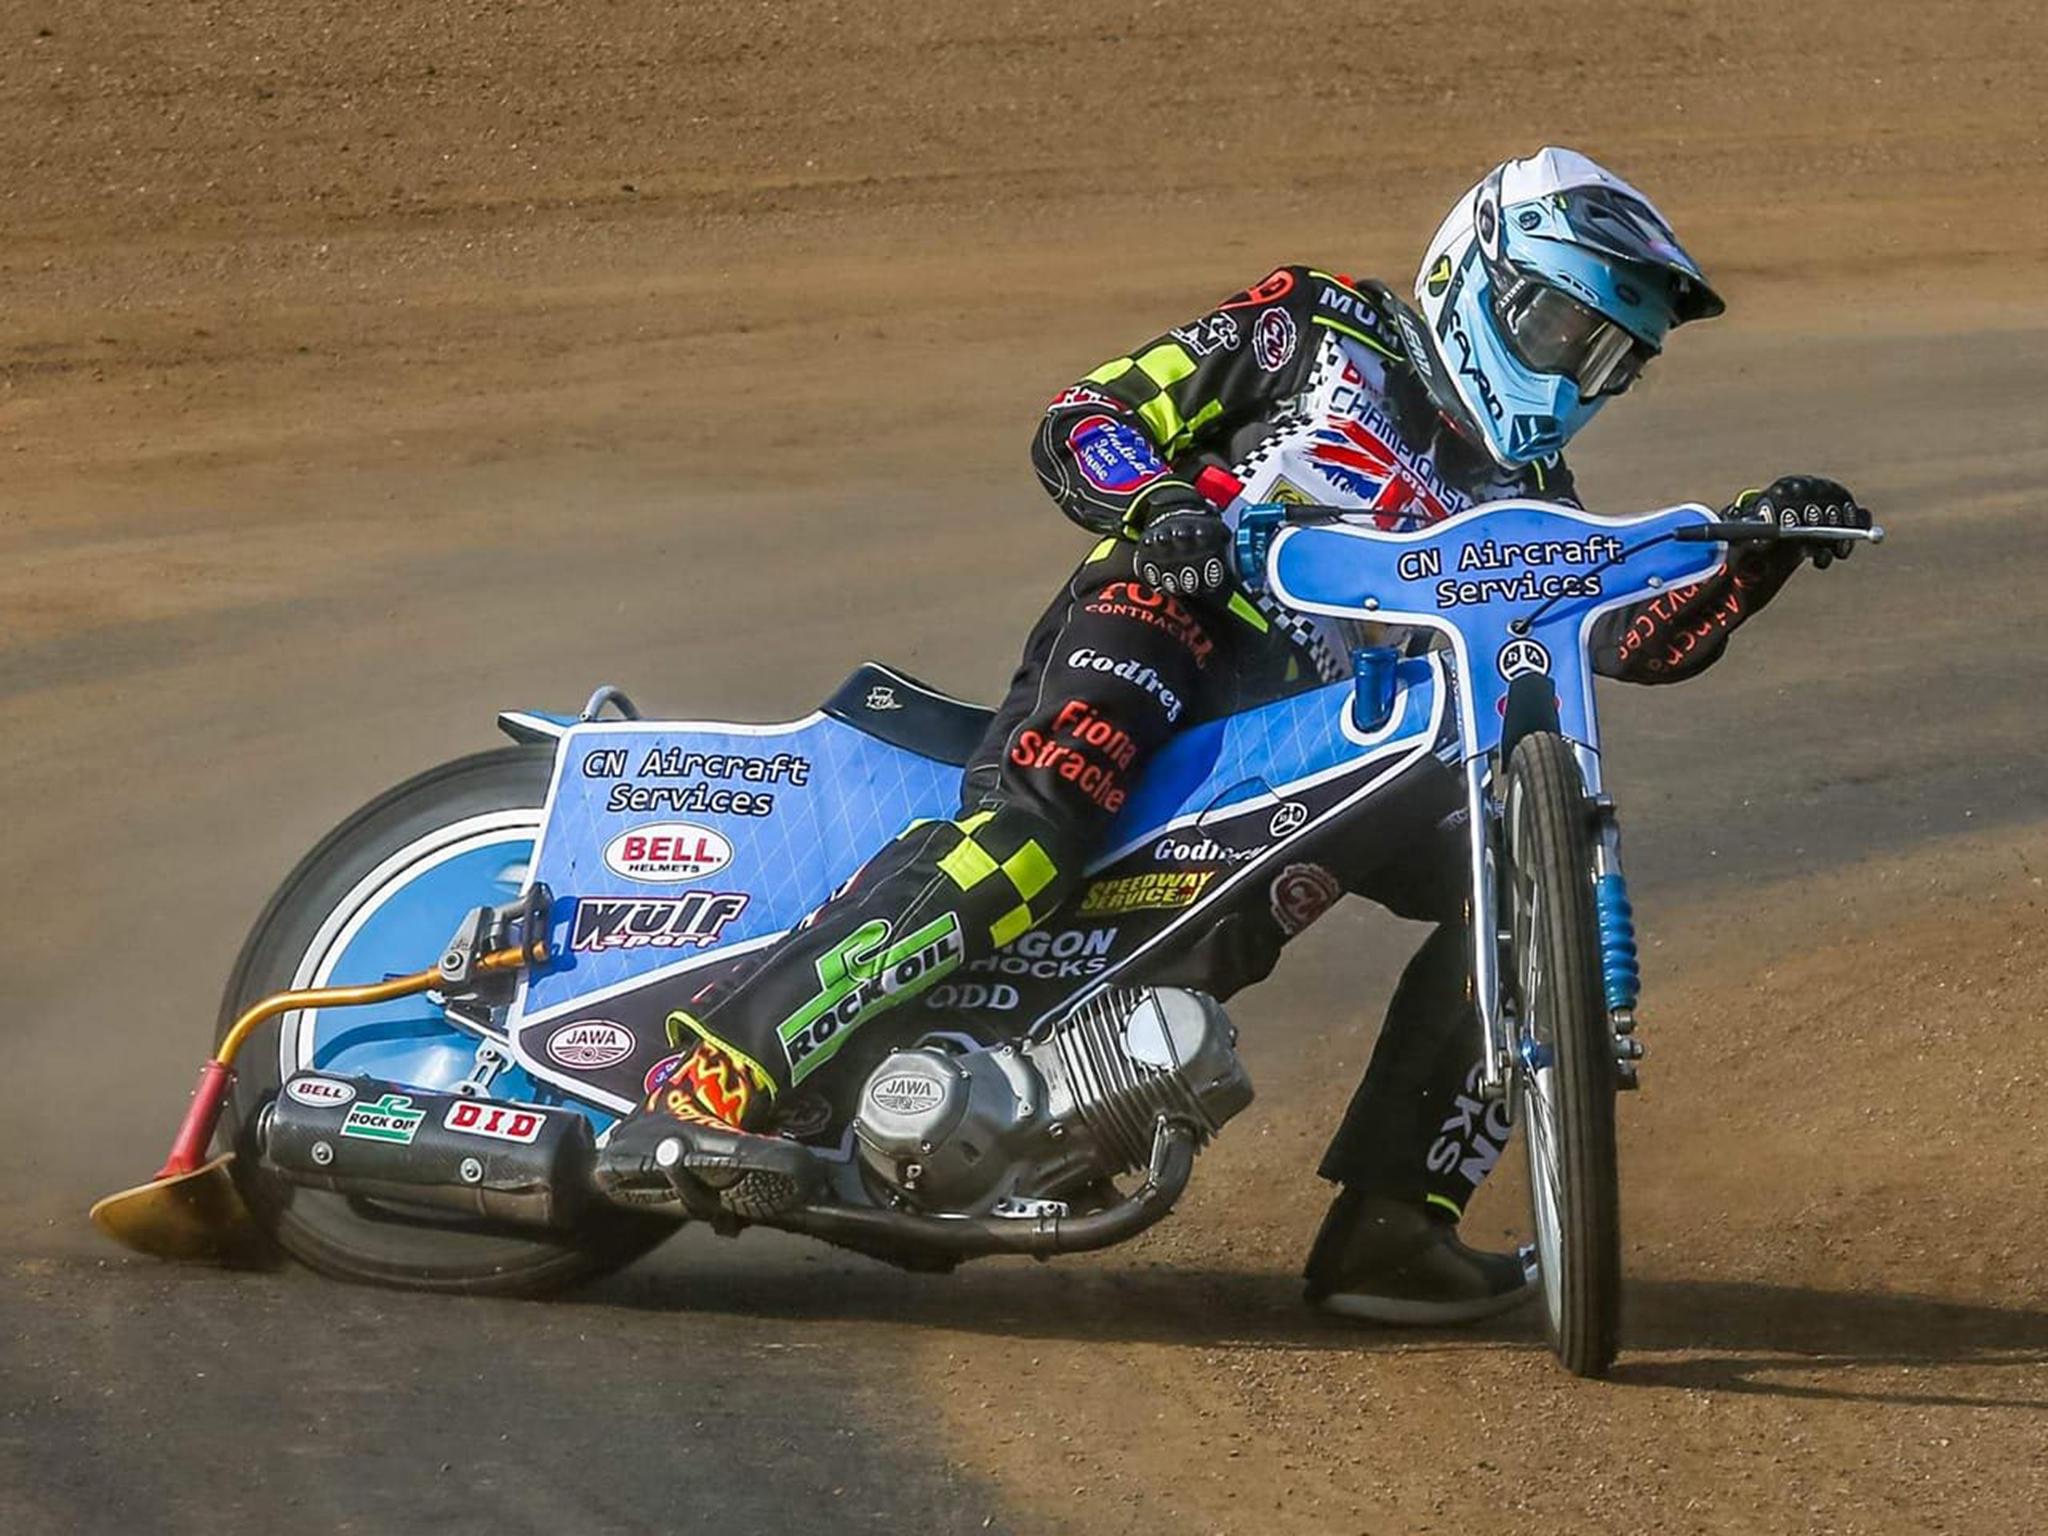 Sam Norris suffered a serious speedway accident on Sunday